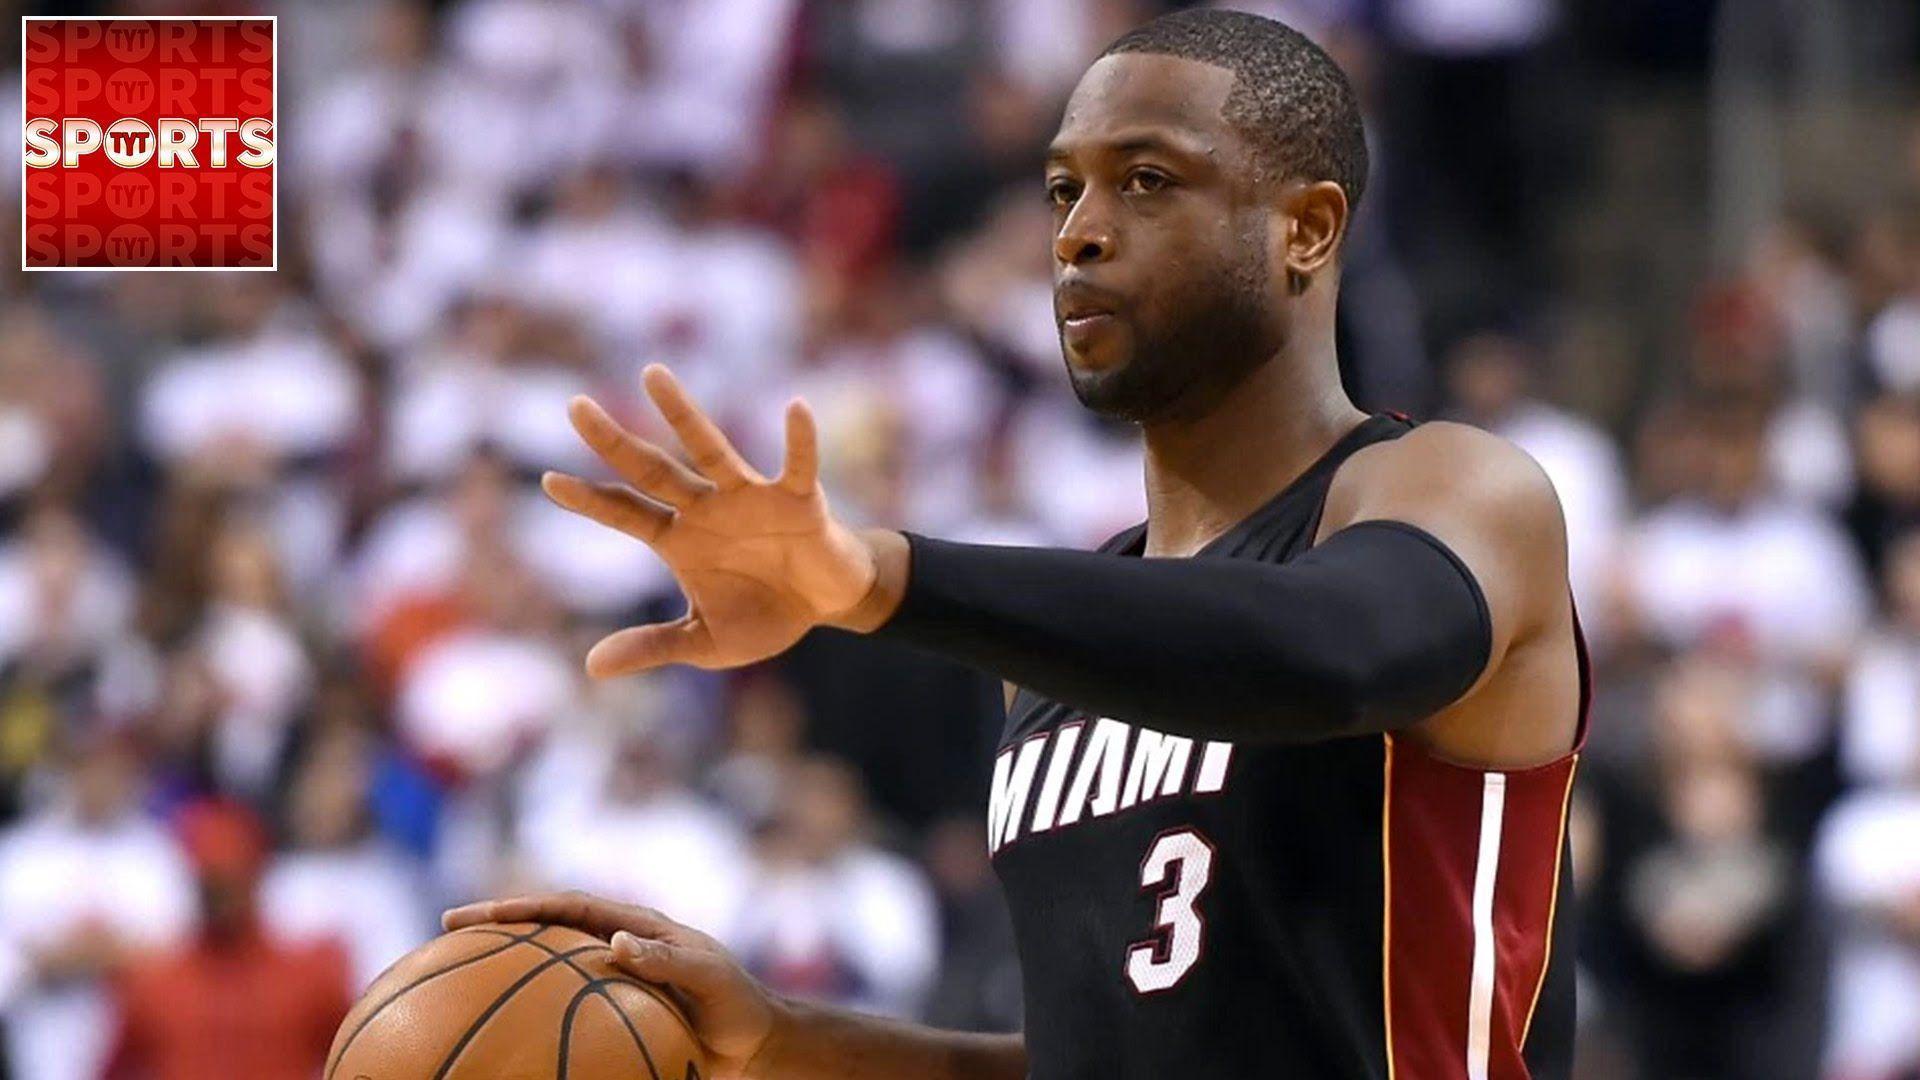 DWYANE WADE Signs With the BULLS Fans Who Burned His Jersey Are